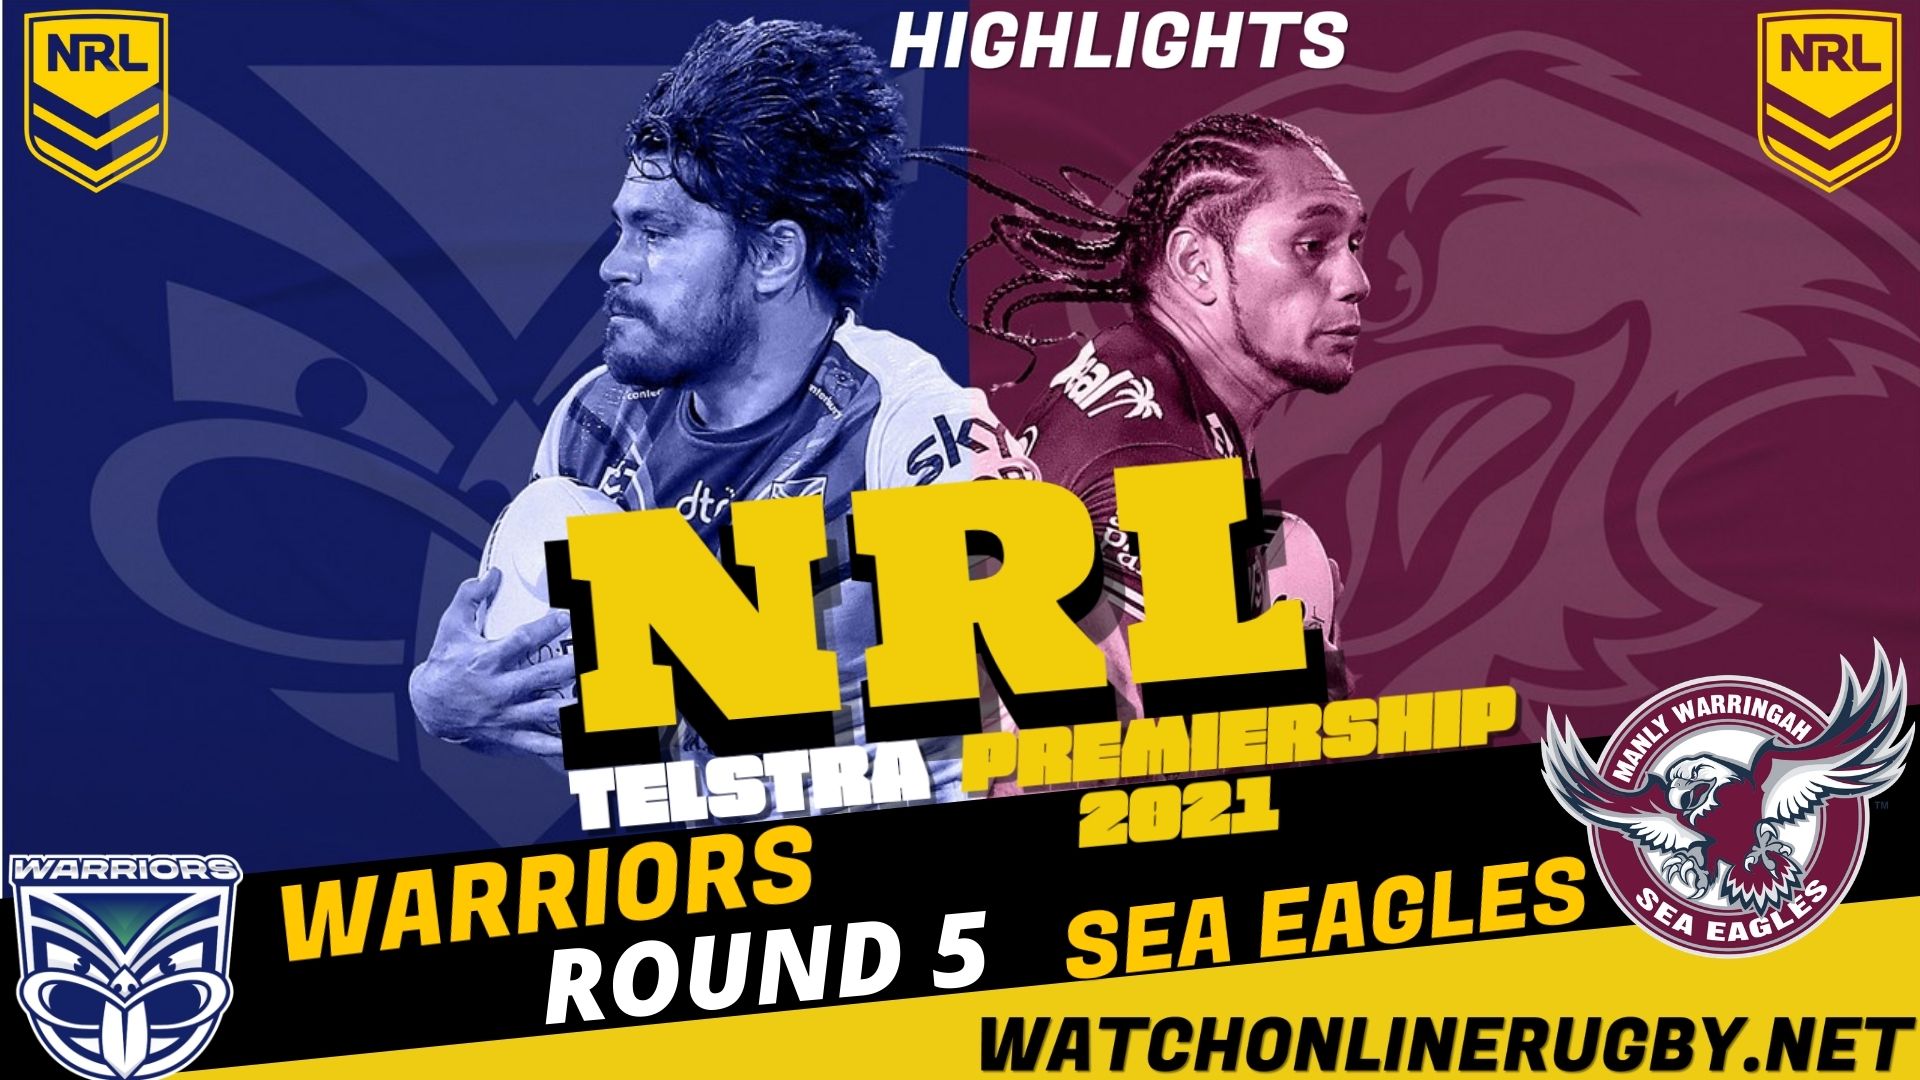 Warriors Vs Sea Eagles Highlights RD 5 NRL Rugby